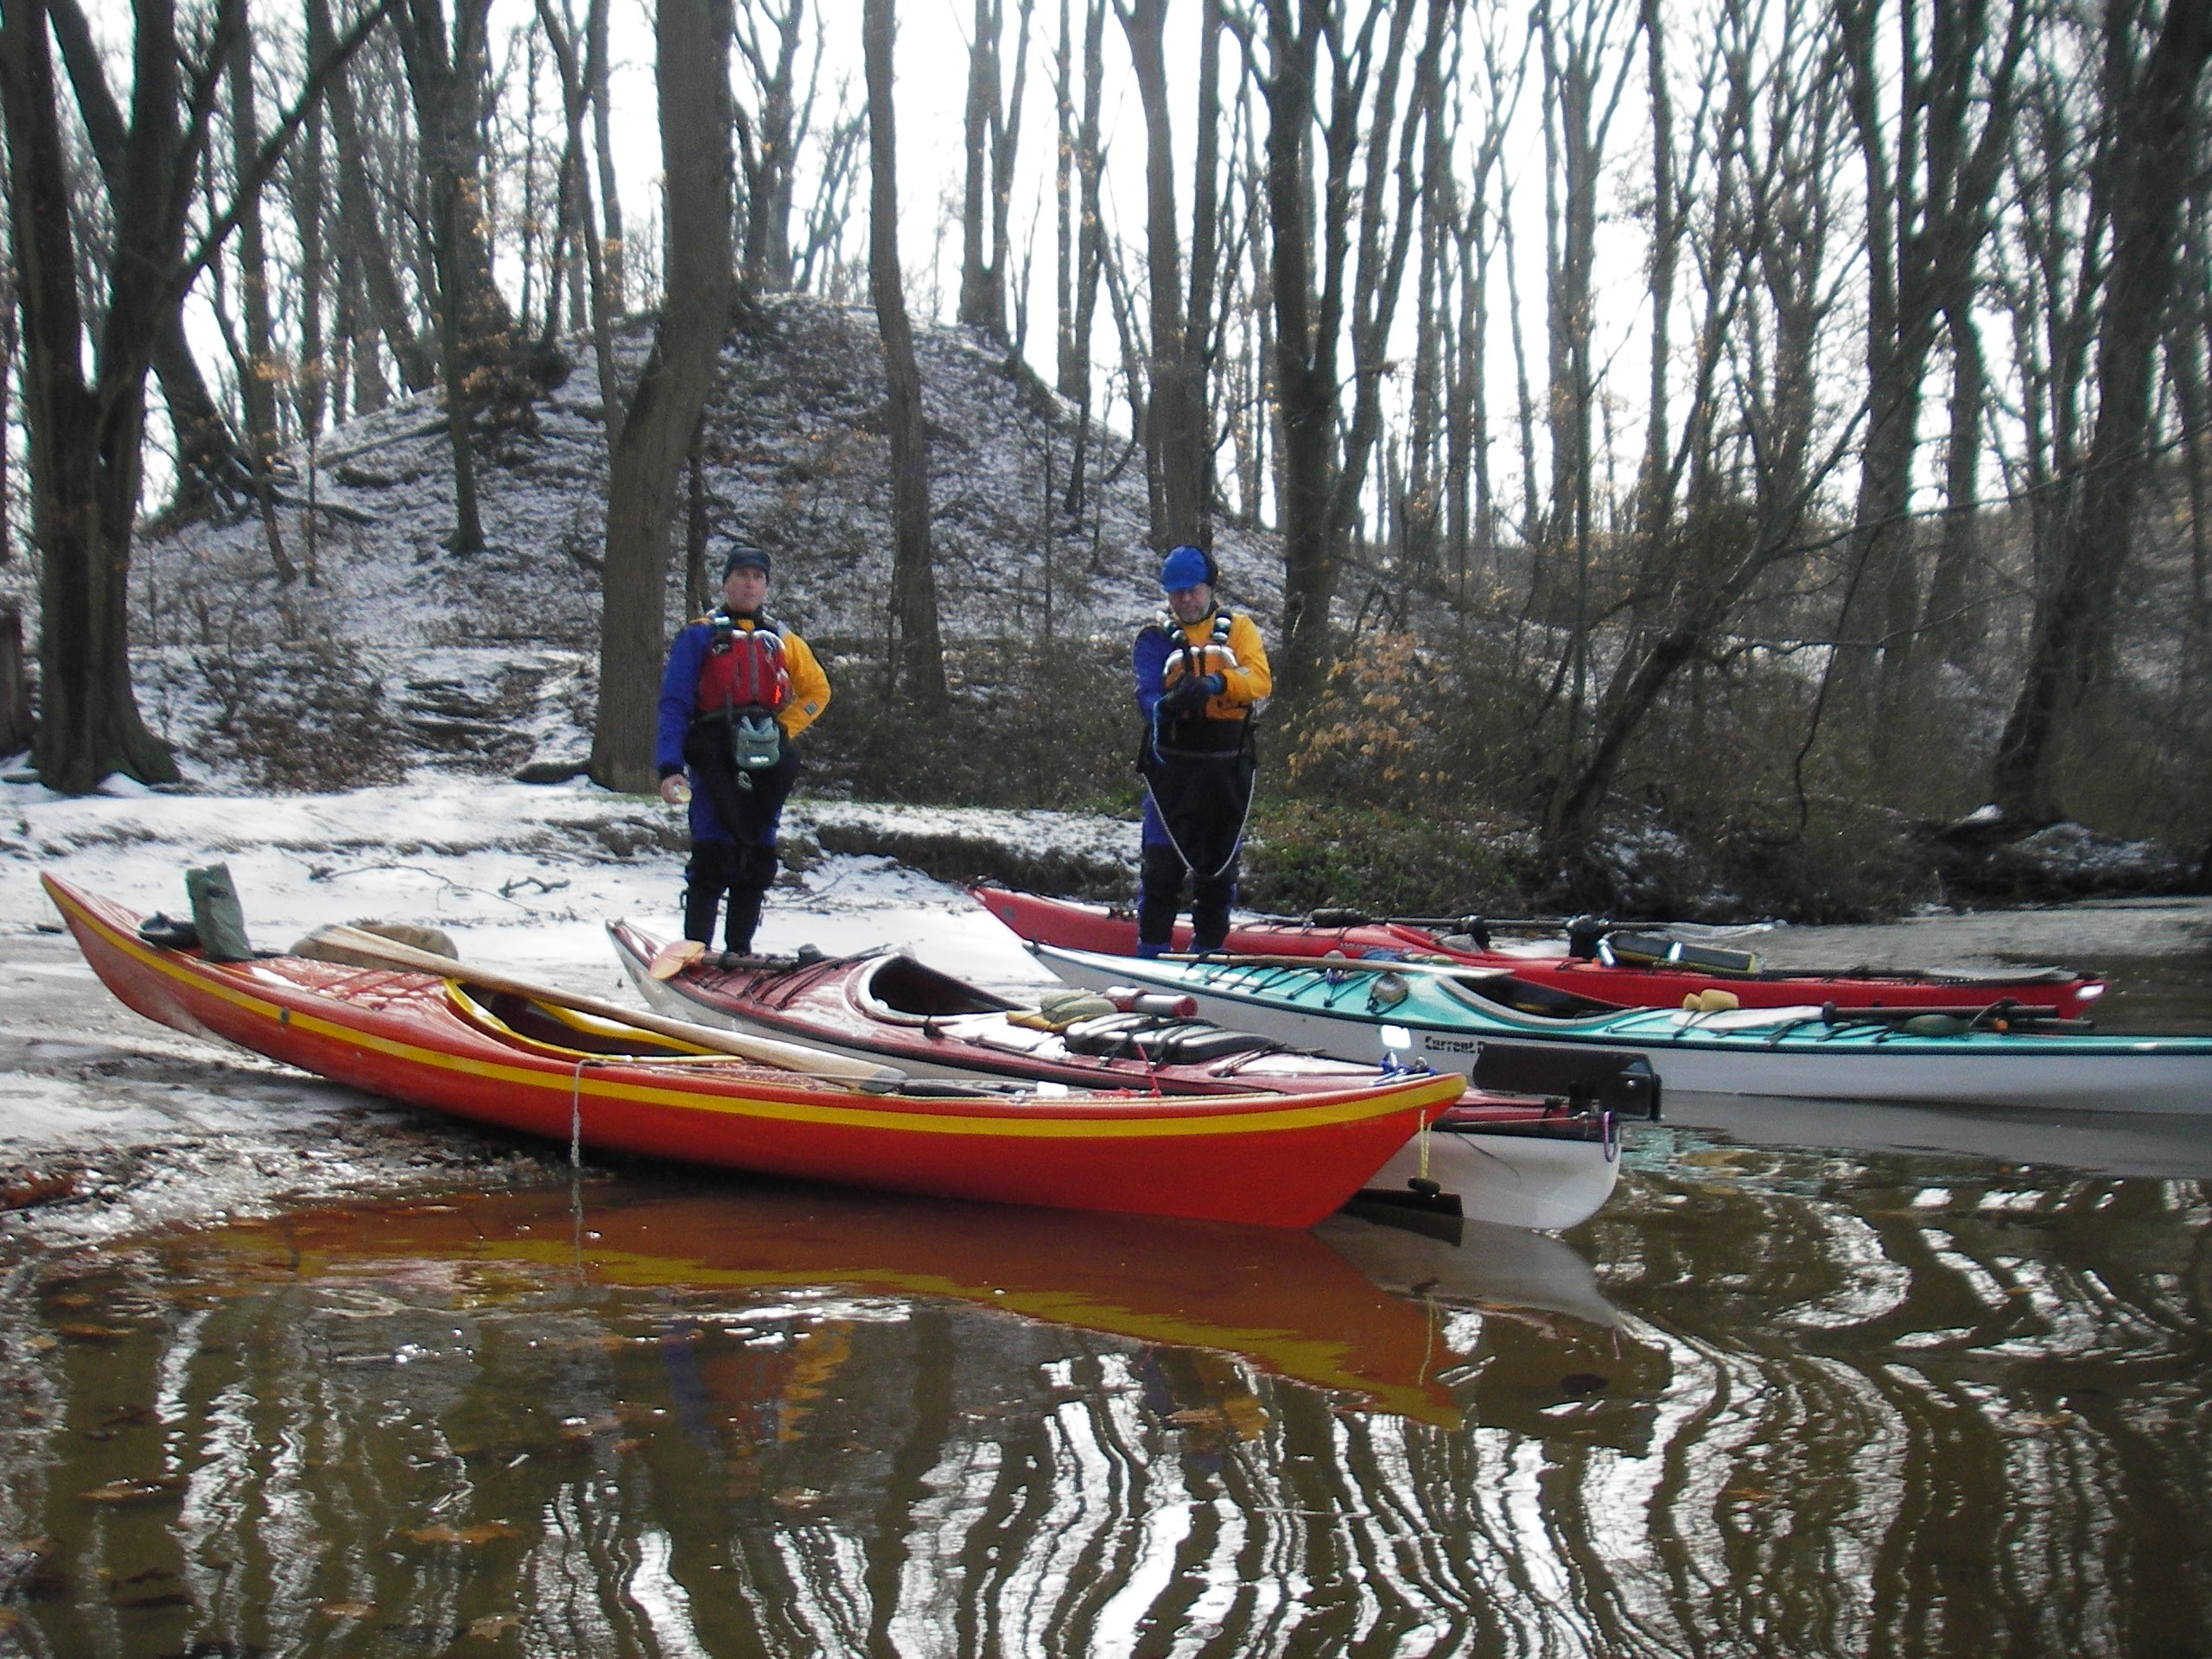 Cold water paddlers at Fox Hole, Sassafras River, MD